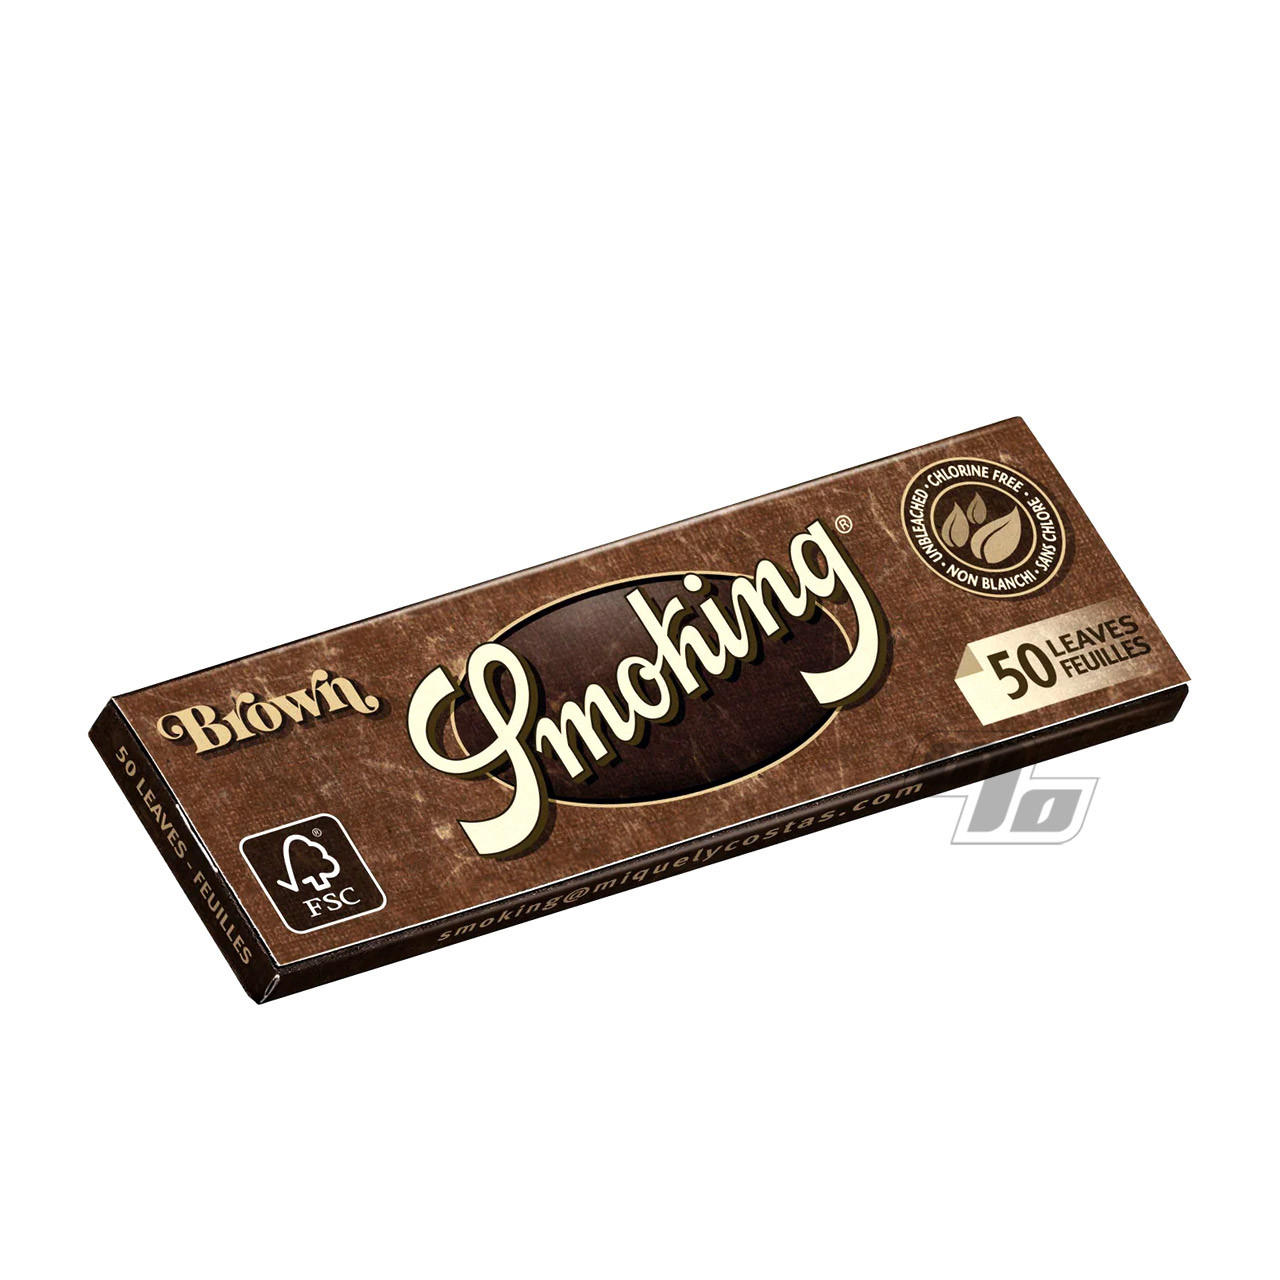  Smoking Brand Rolling Paper - Brown Unbleached - 1 1/4